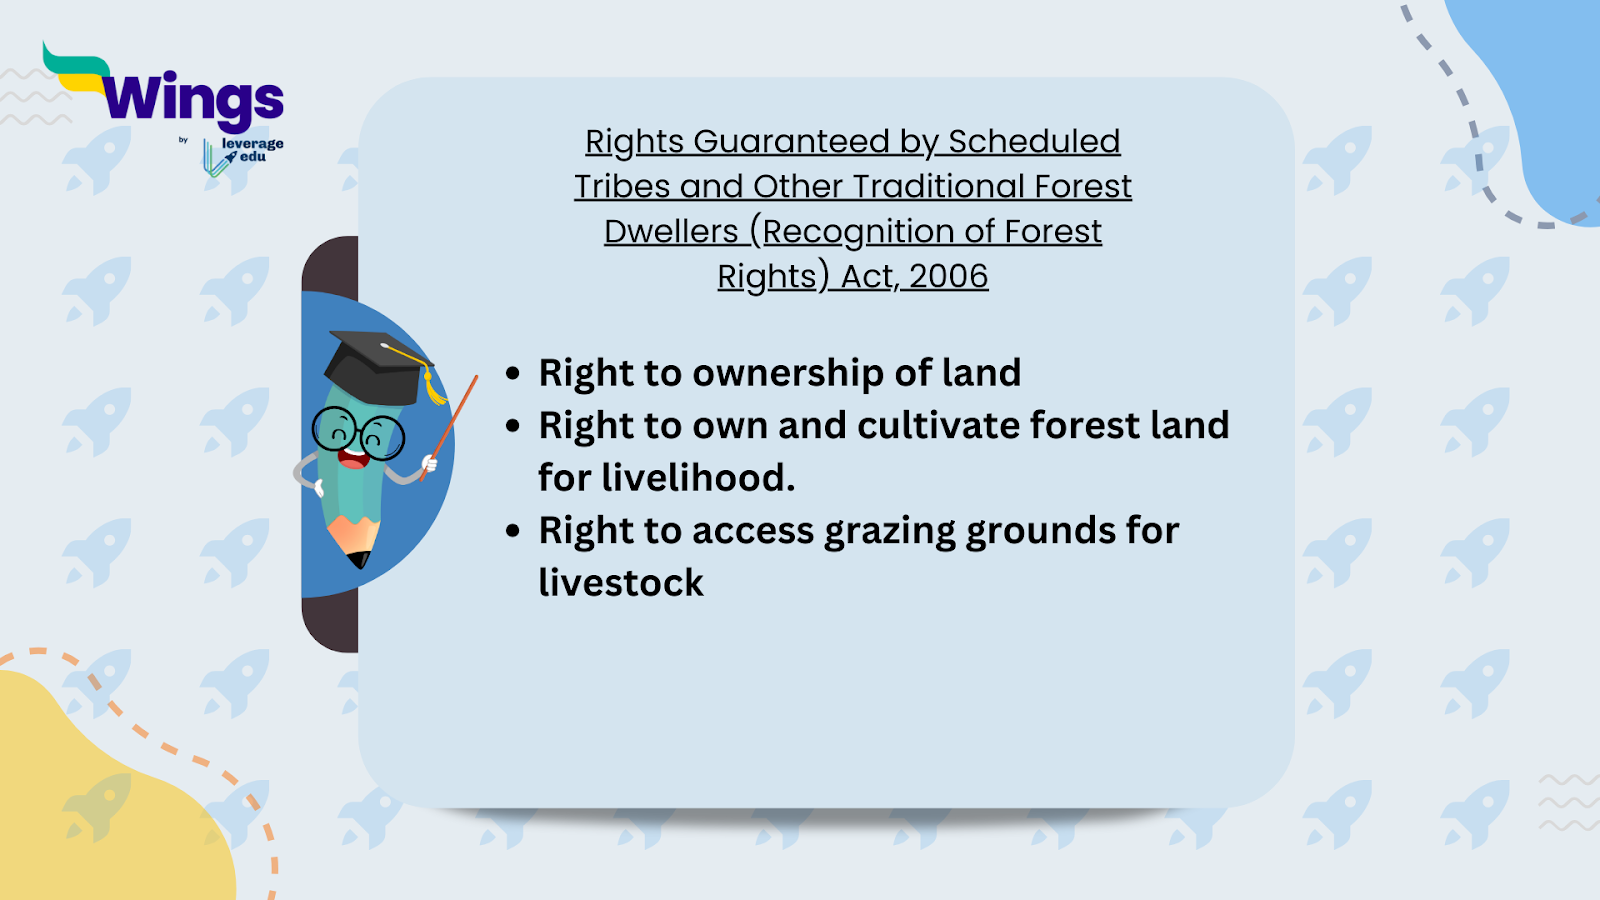 Scheduled Tribes and Other Traditional Forest Dwellers (Recognition of Forest Rights) Act, 2006